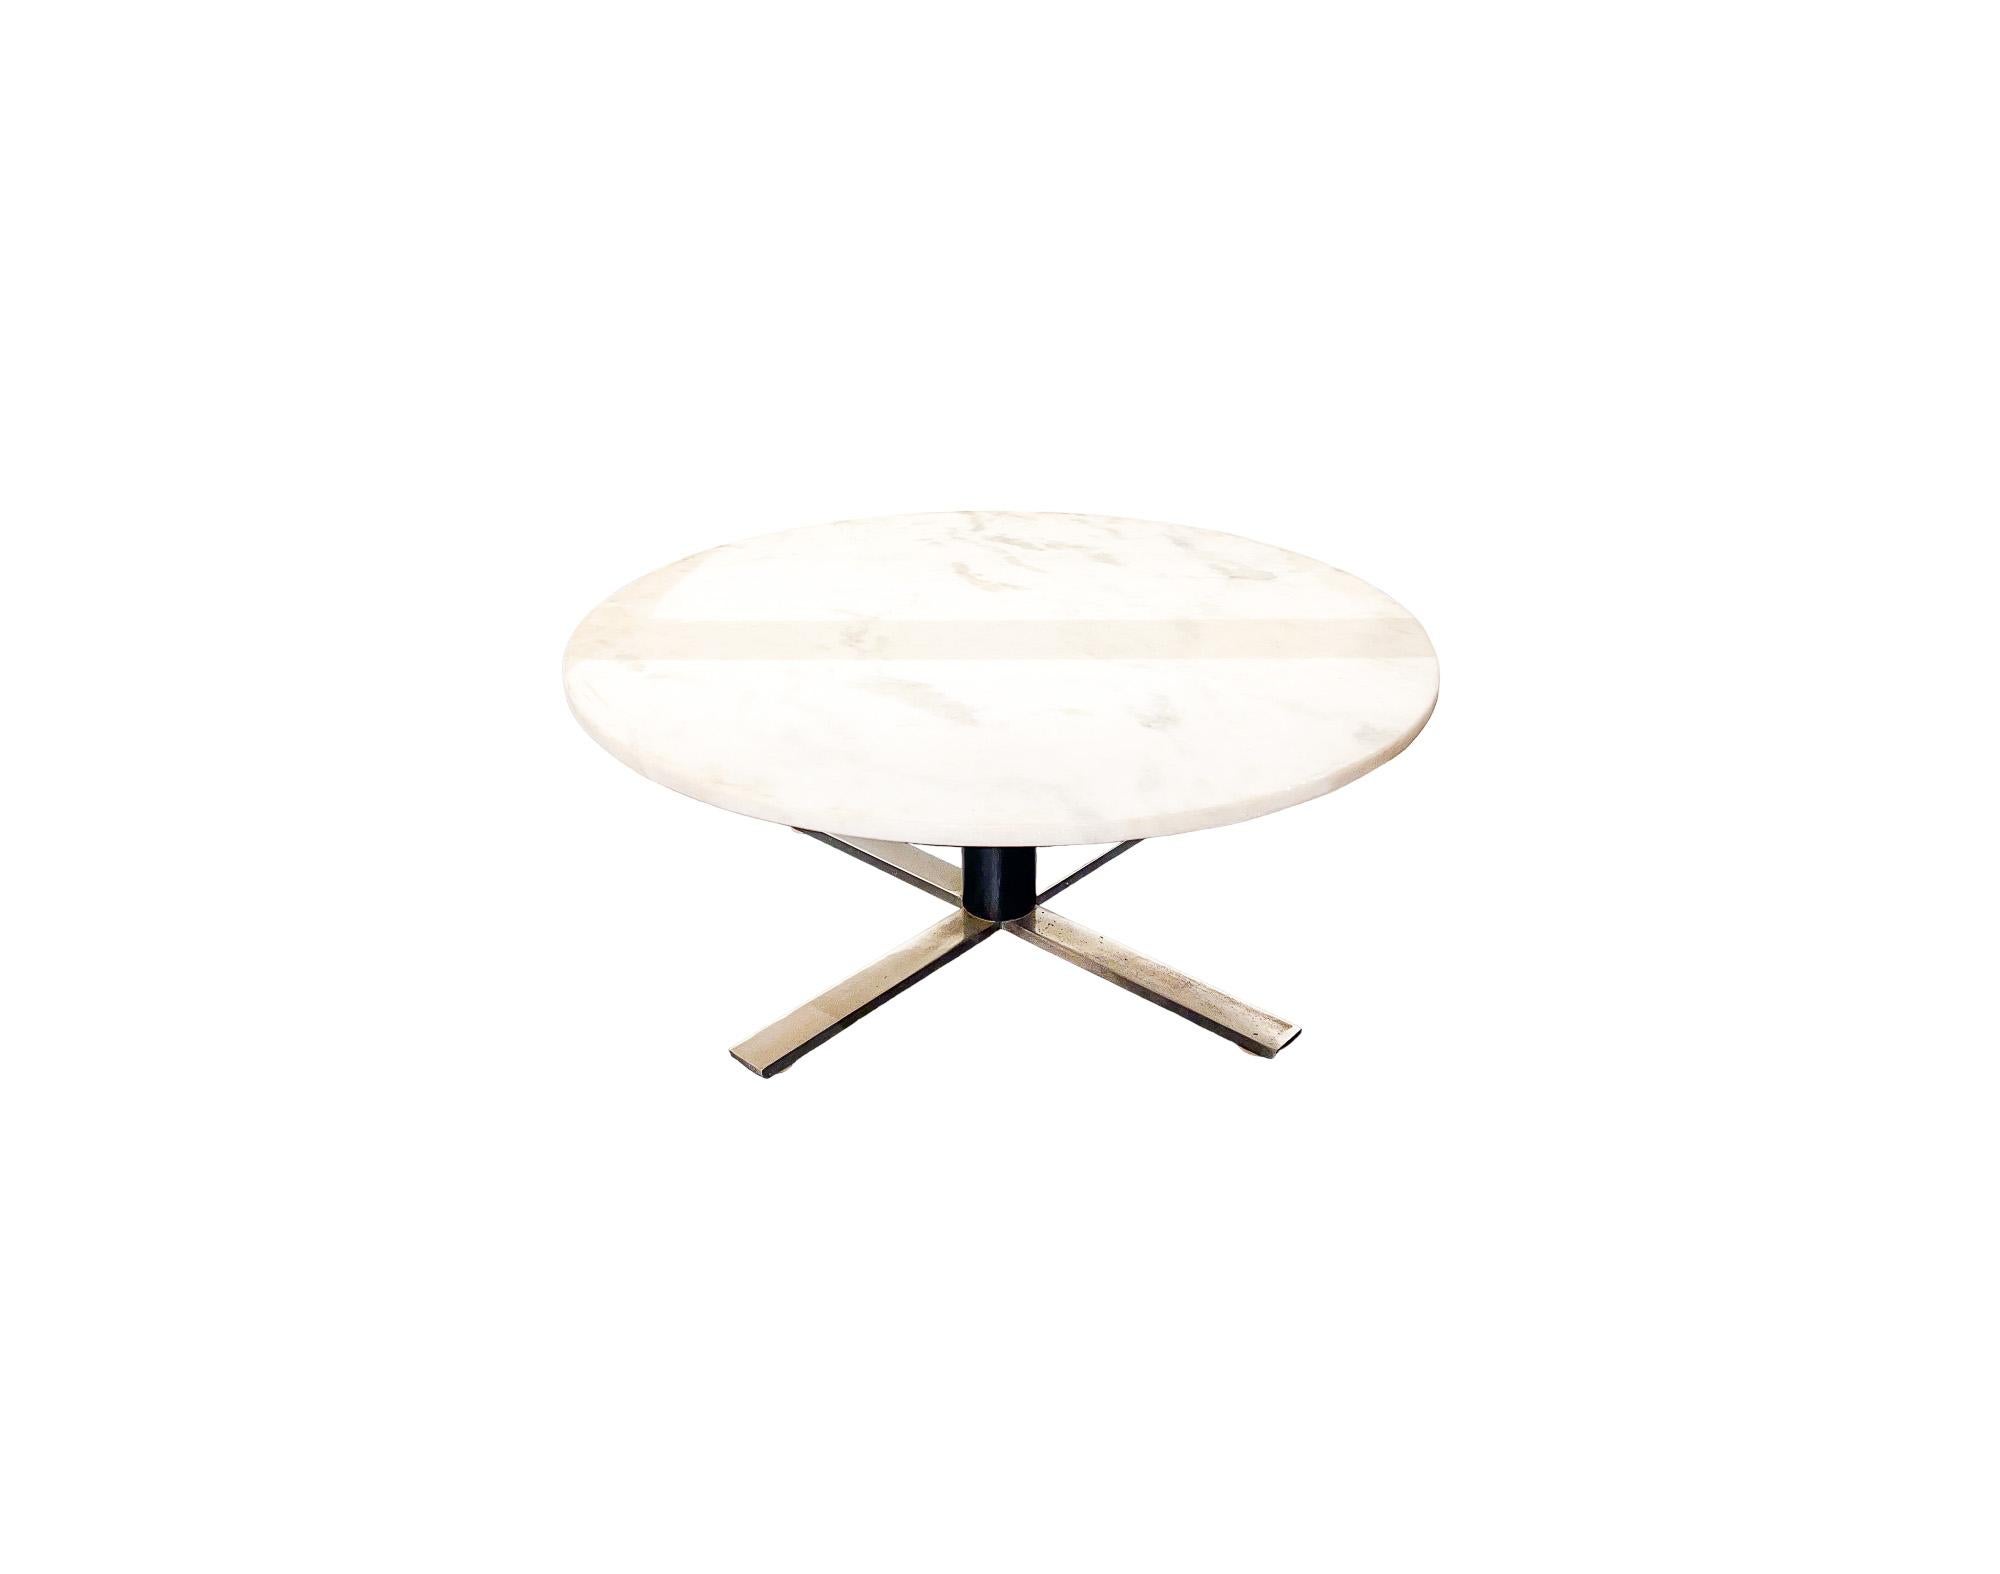 The “Mesa de Centro Chanceler” designed by Jorge Zalszupin and manufactured by his own company L’Atelier, Brazil 1959. The circular marble top is supported by Brazilian Rosewood (Jacaranda) stem and X-shaped steel base. This model was pretty much a